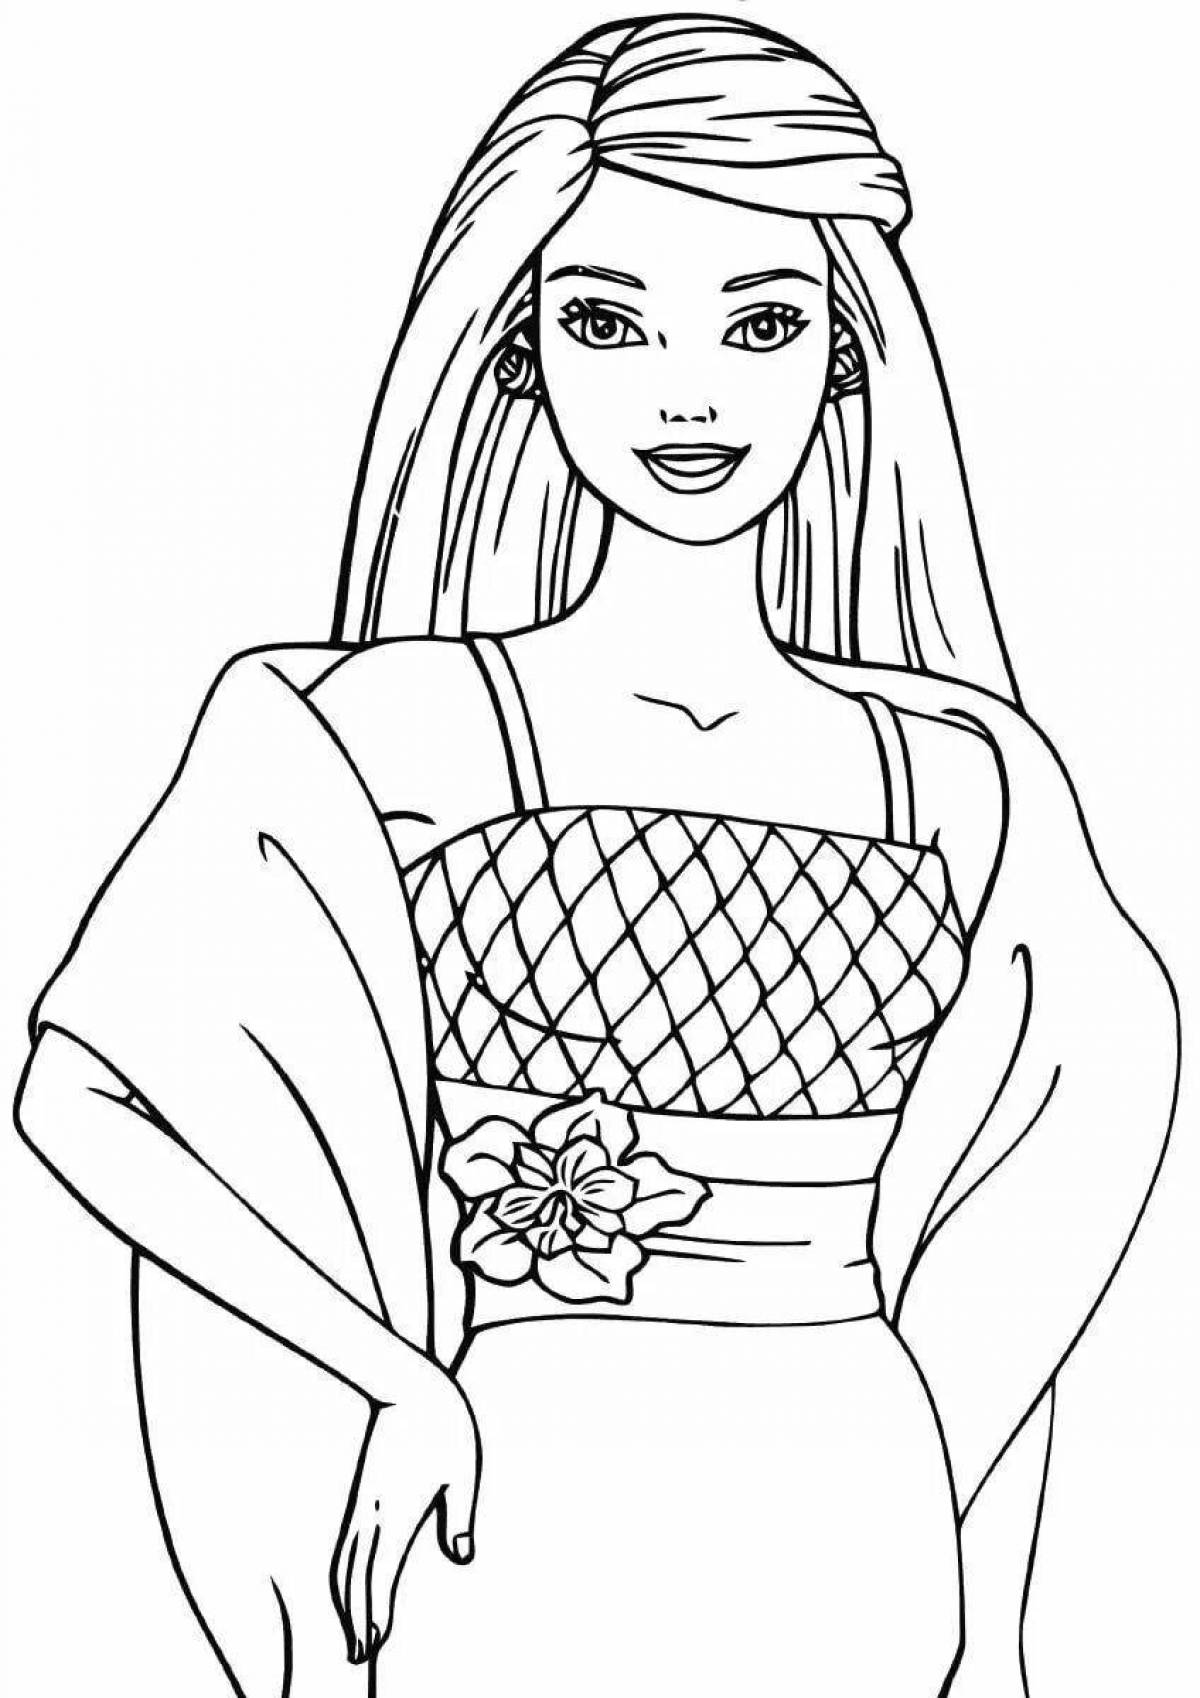 Fun coloring fashionable for kids